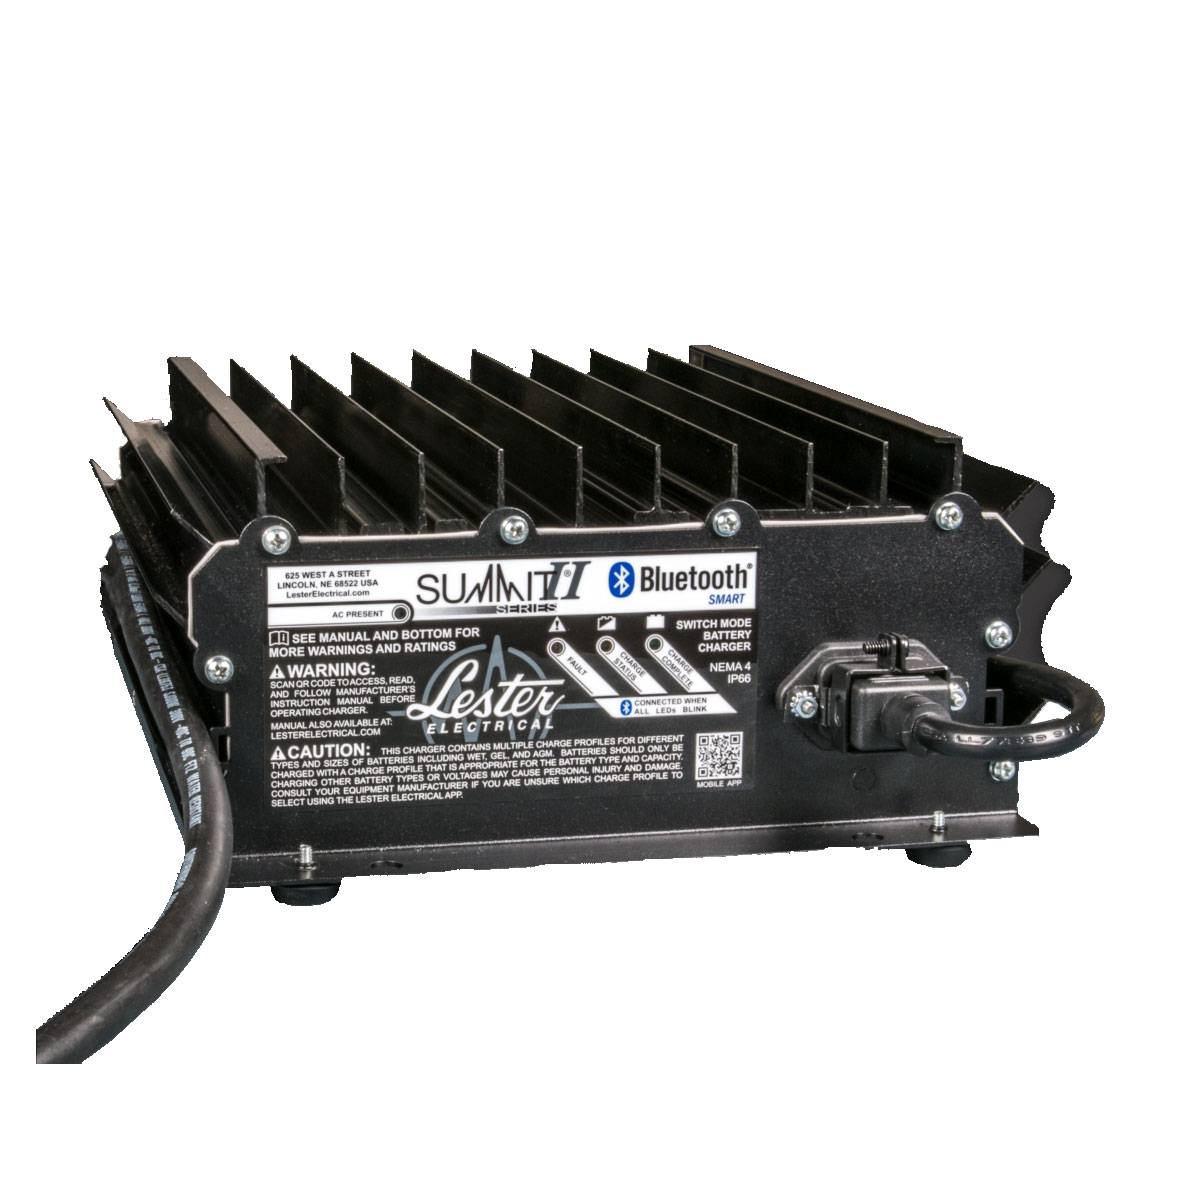 Lester Electrical Summit Series II Industrial Charger 1050W per 24V/ 36V/ 48V 25A/22A con Bluetooth